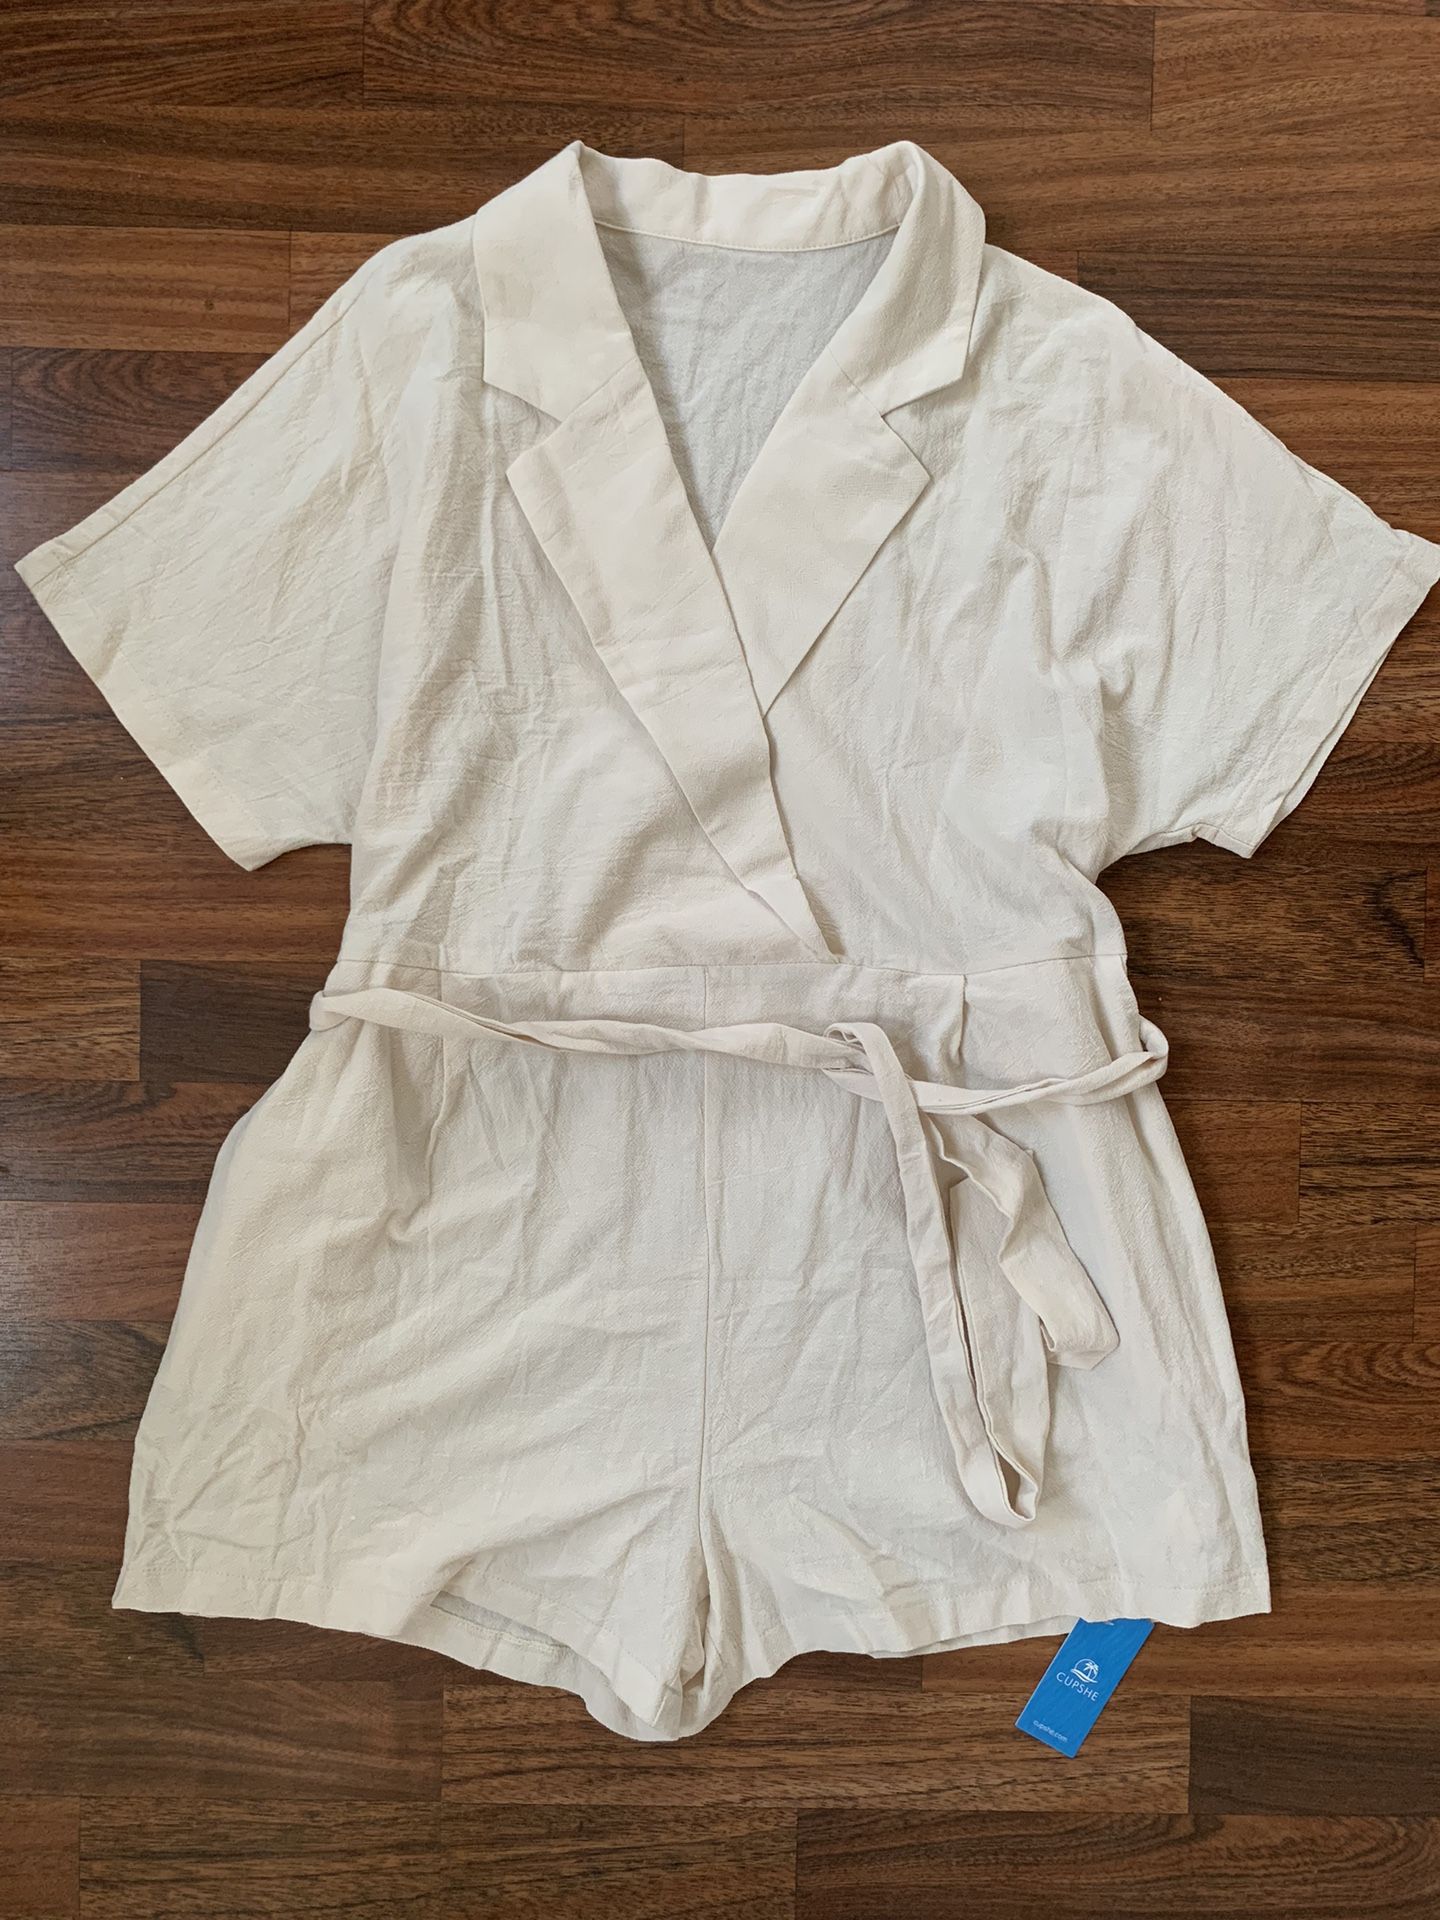 Cupshe V Neck Romper With Tie Size Medium  Beige Color